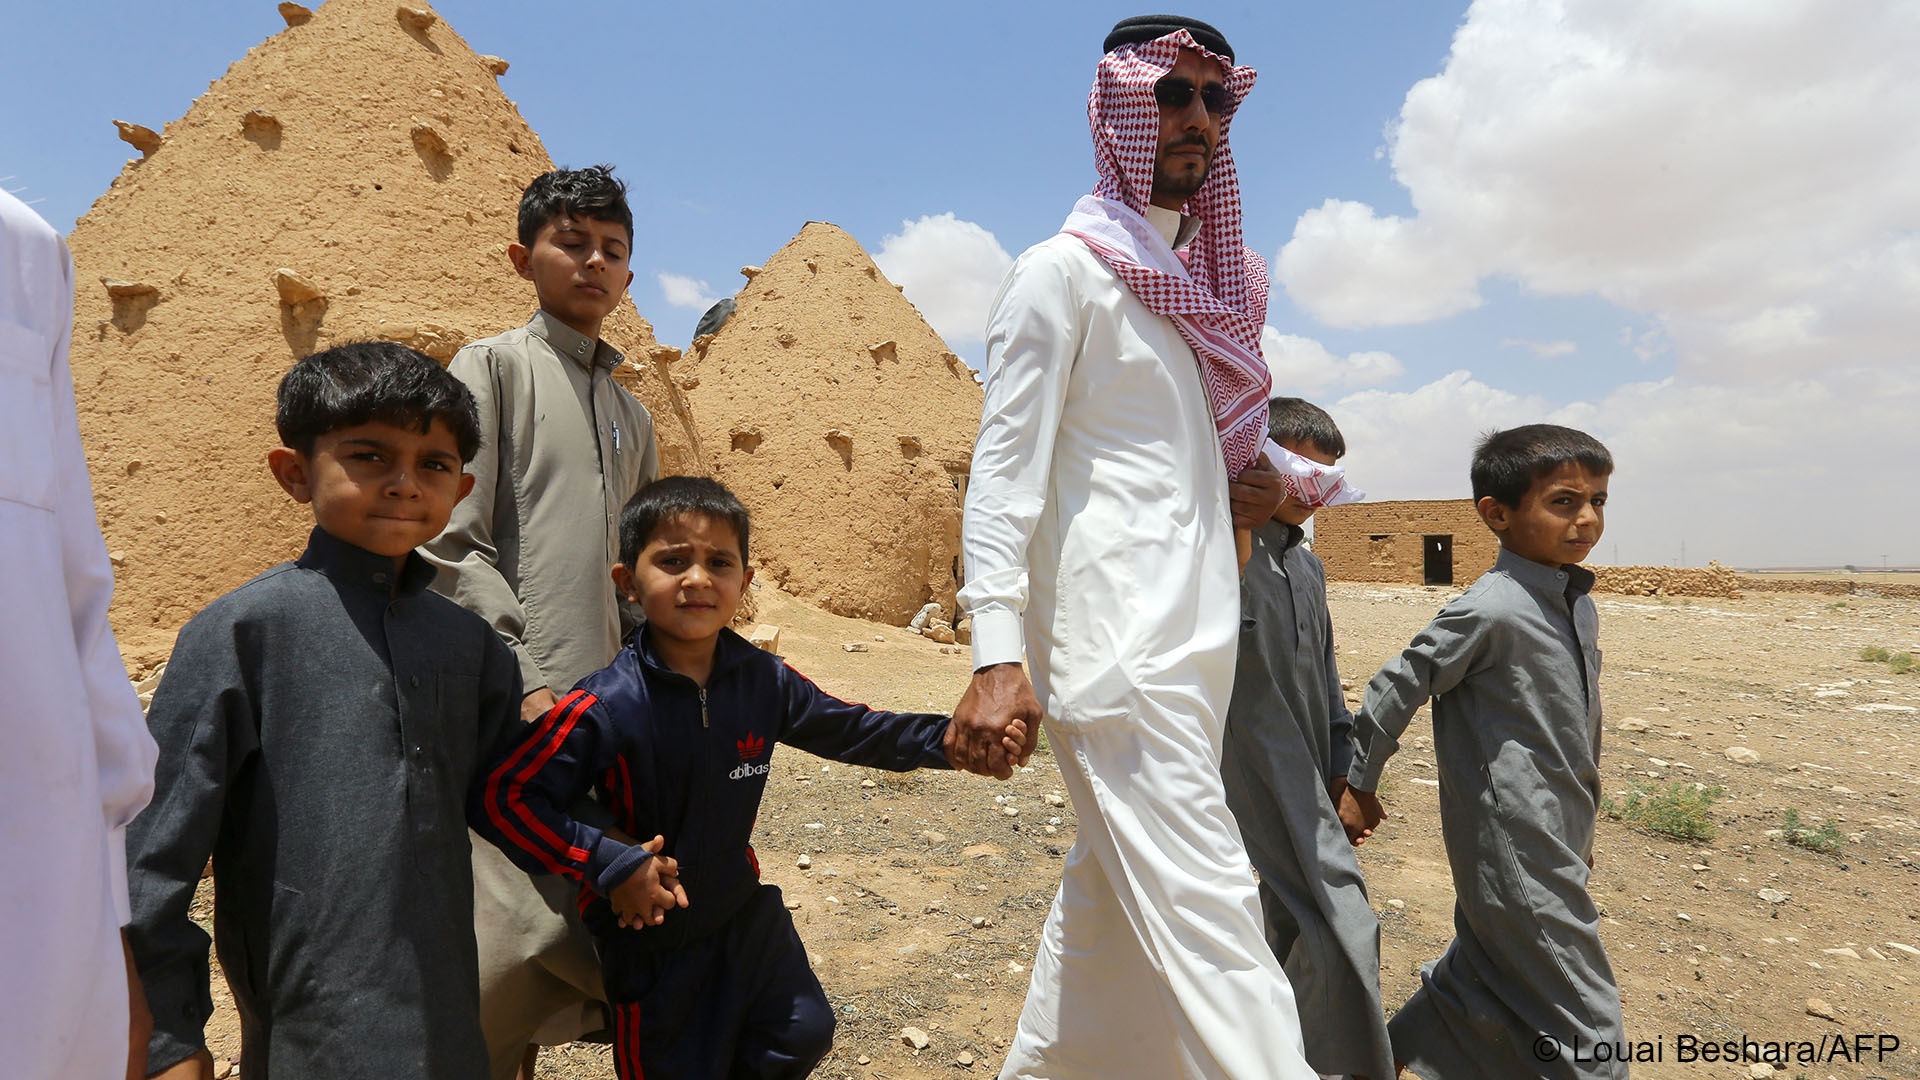  Abdulaziz al-Oqab walks with with his nephews who were orphaned when a landmine exploded under a pick-up truck, claiming the lives of 21 family members.